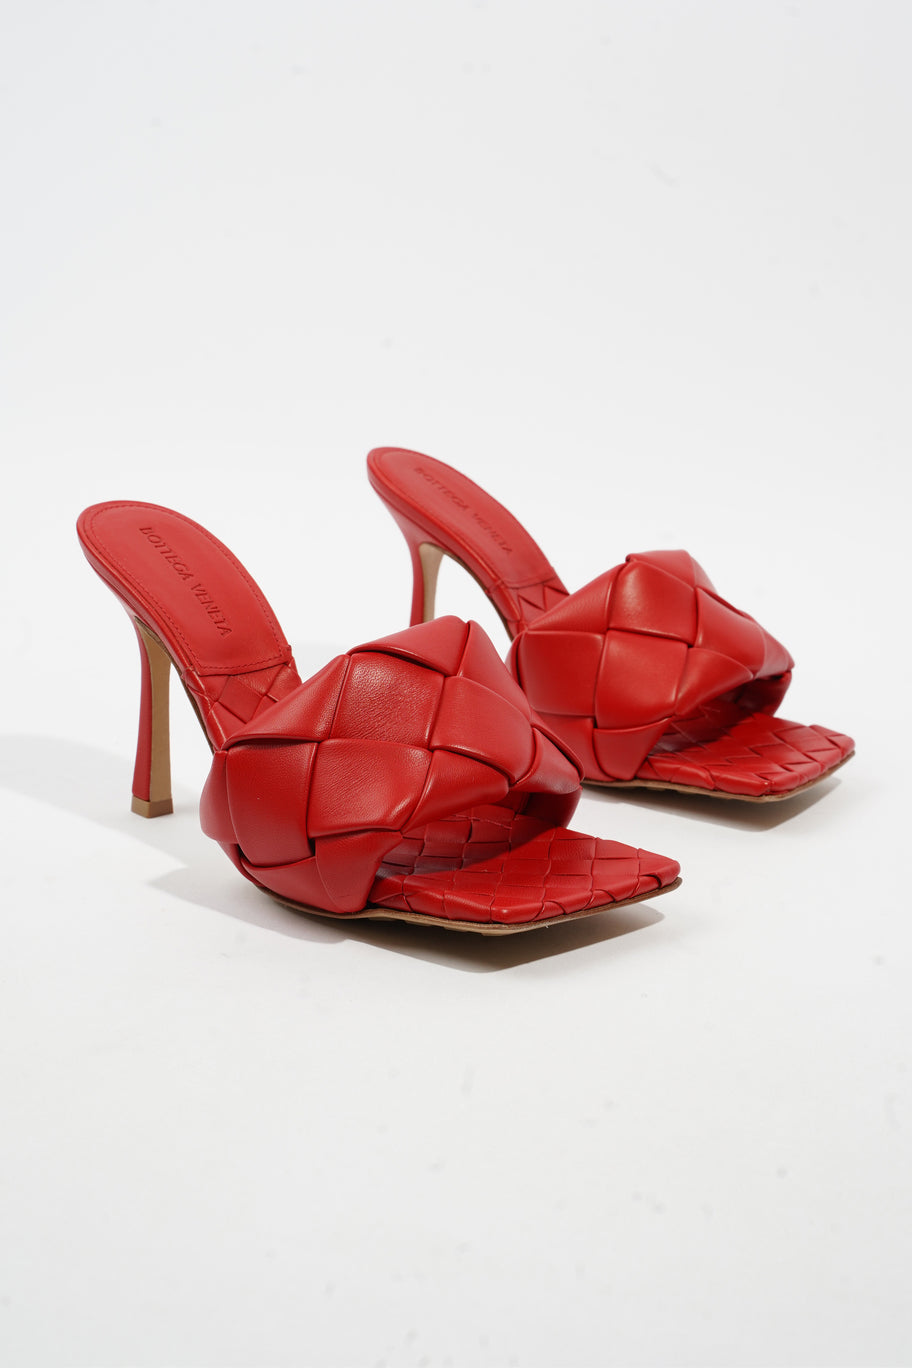 High Sandals 90 Red Leather EU 37.5 UK 4.5 Image 2